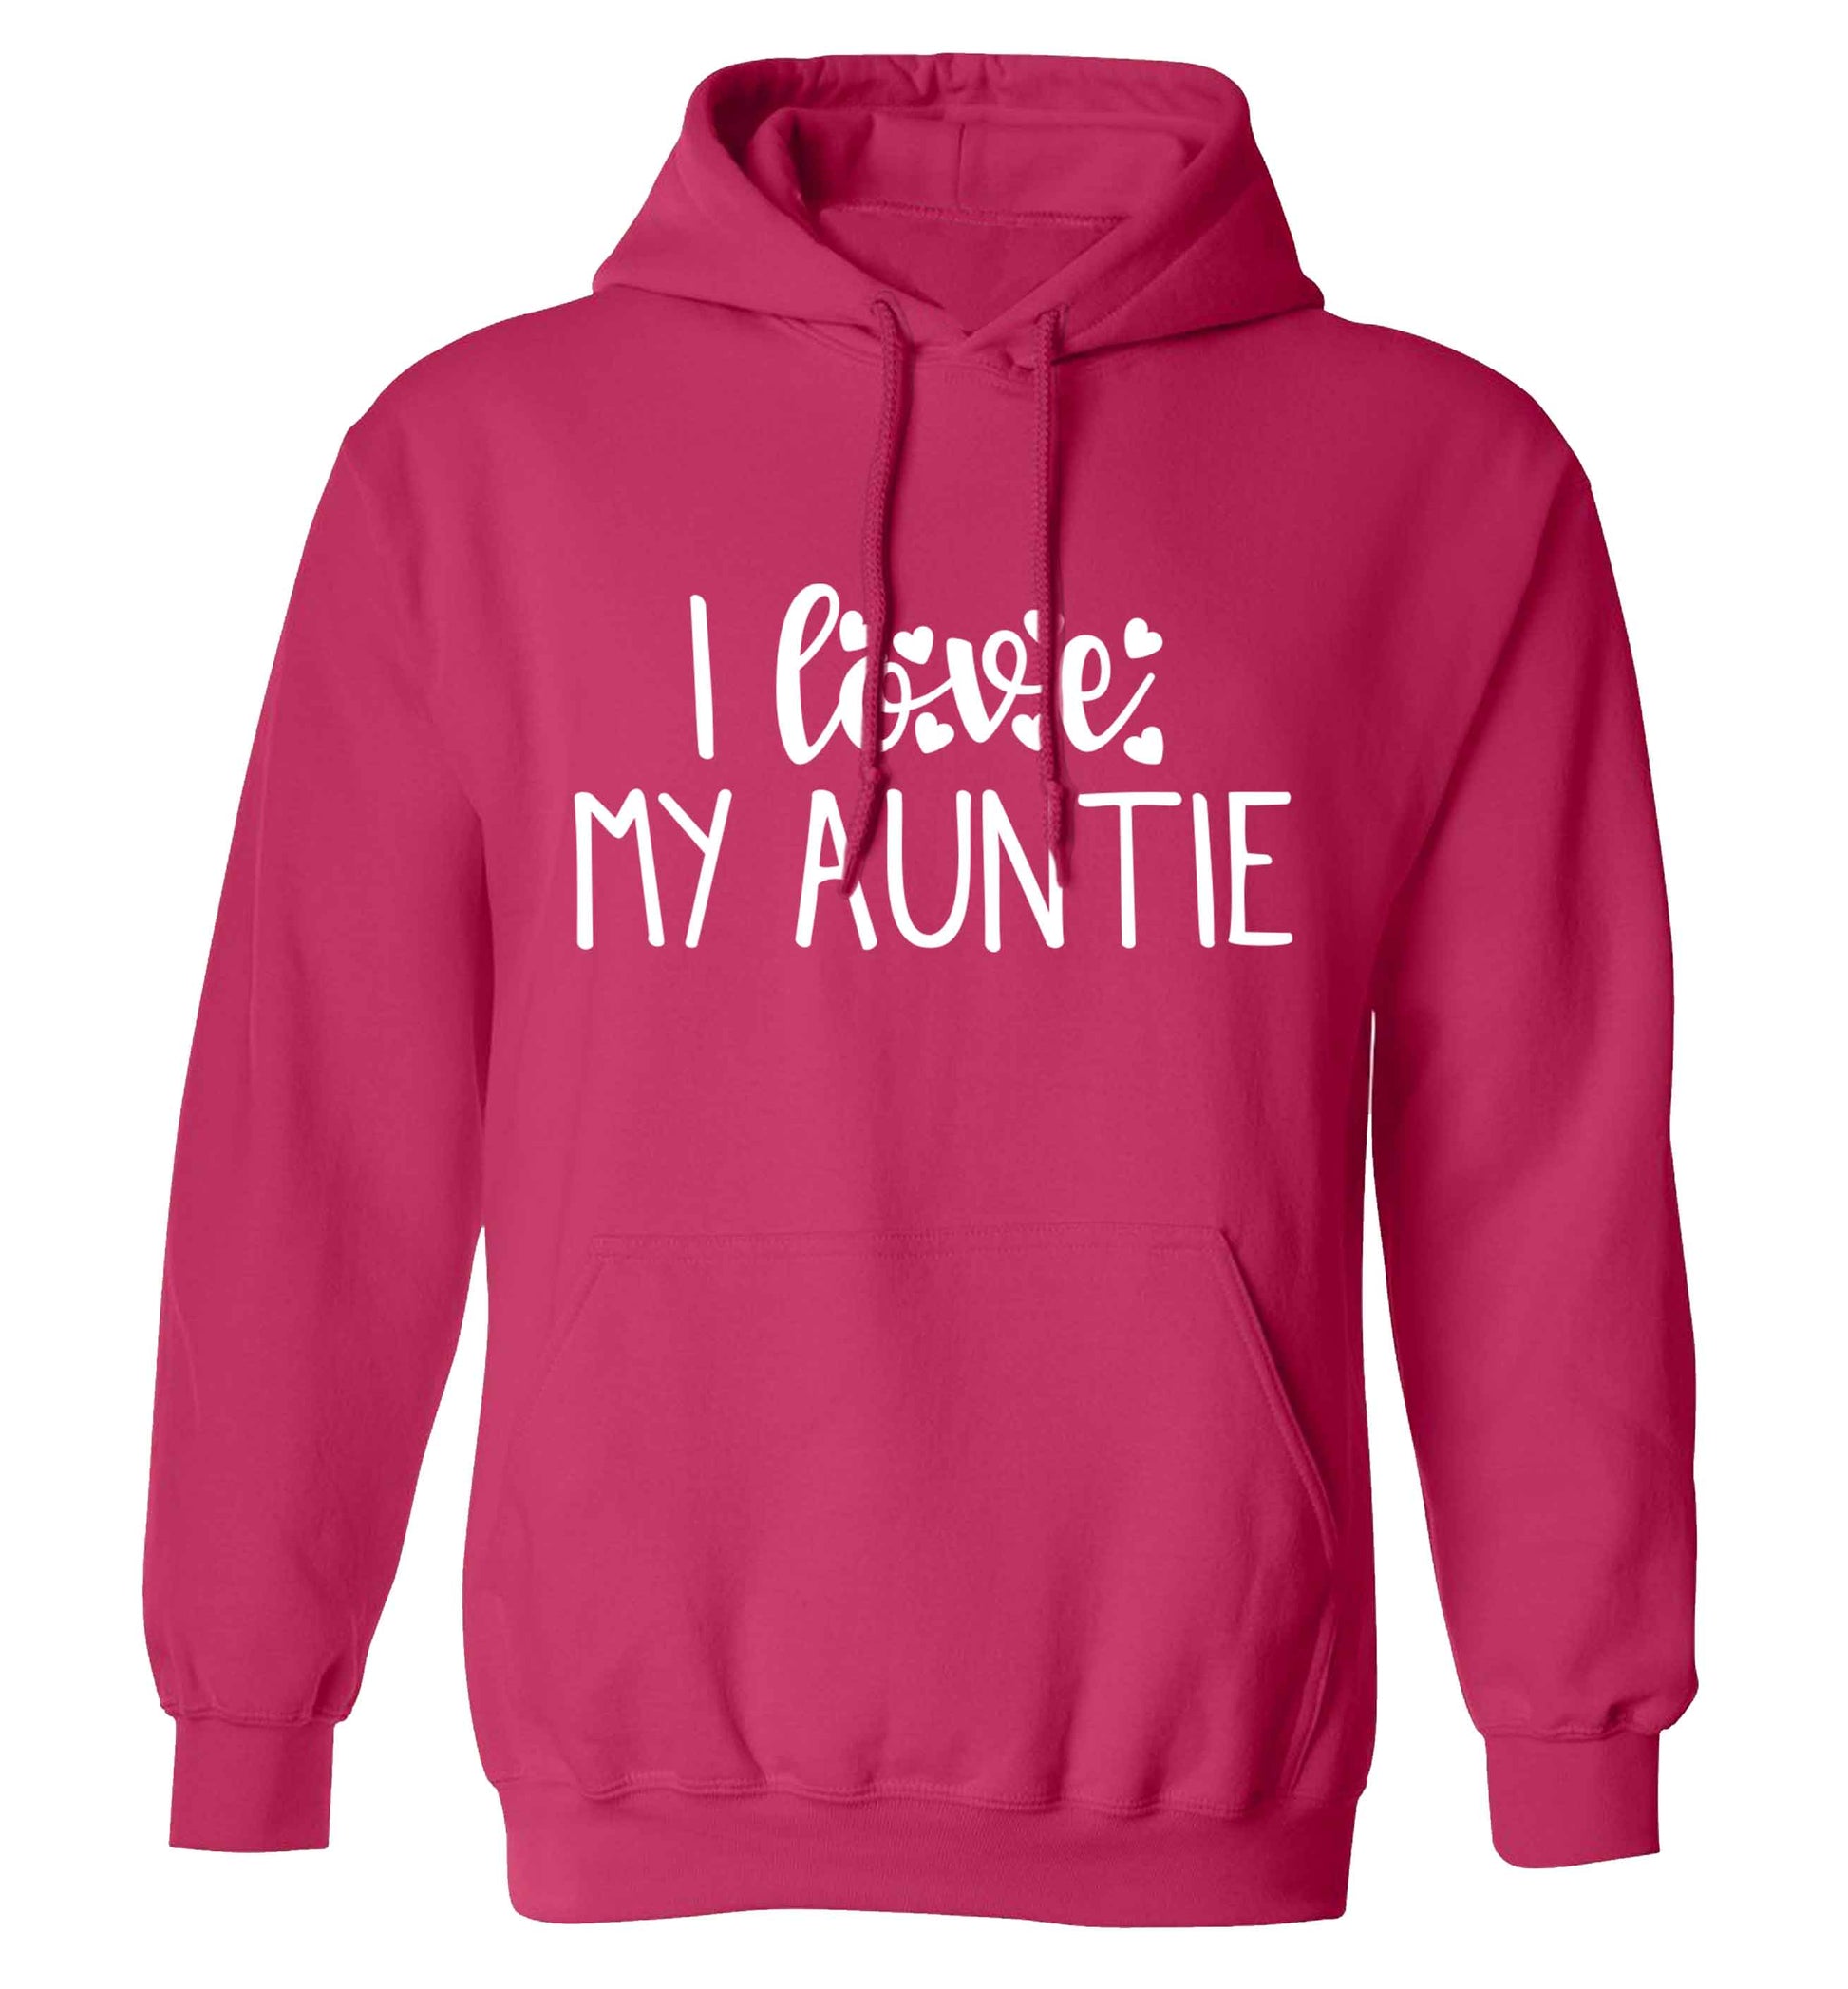 I love my auntie adults unisex pink hoodie 2XL